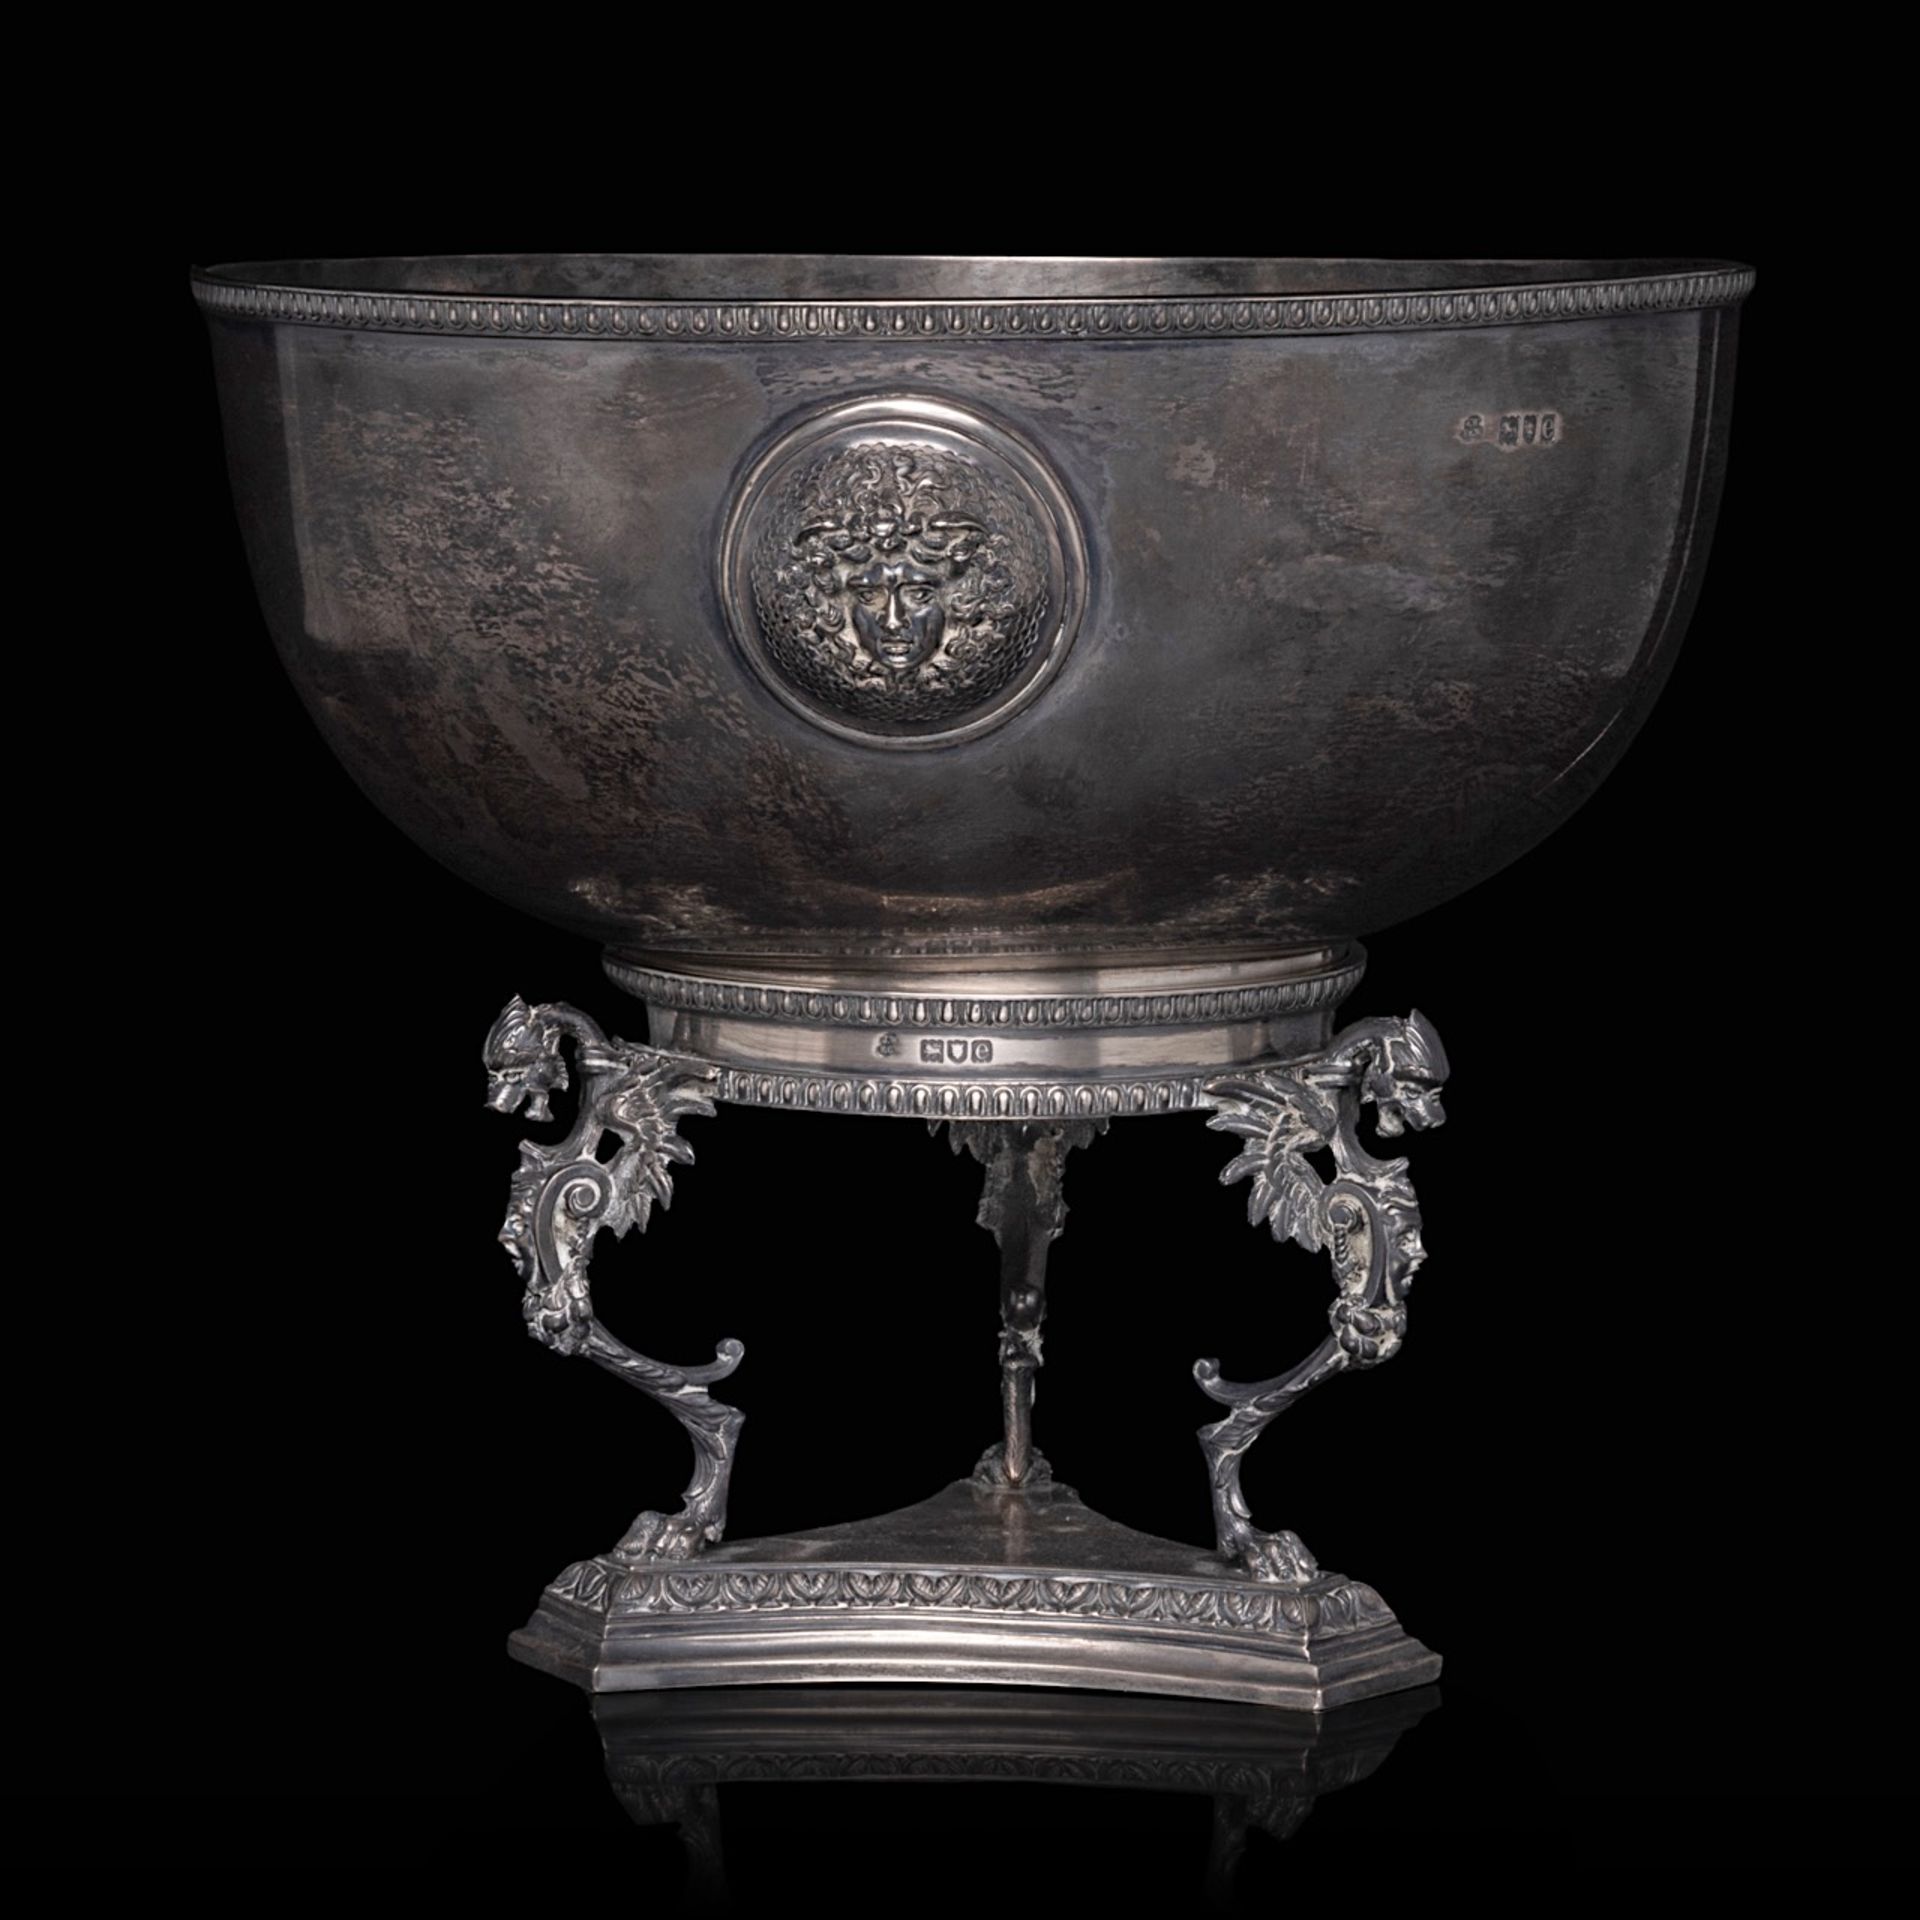 A Neoclassical English silver punchbowl, London hallmarks, year letter E (1900-1901), maker's mark J - Image 3 of 8